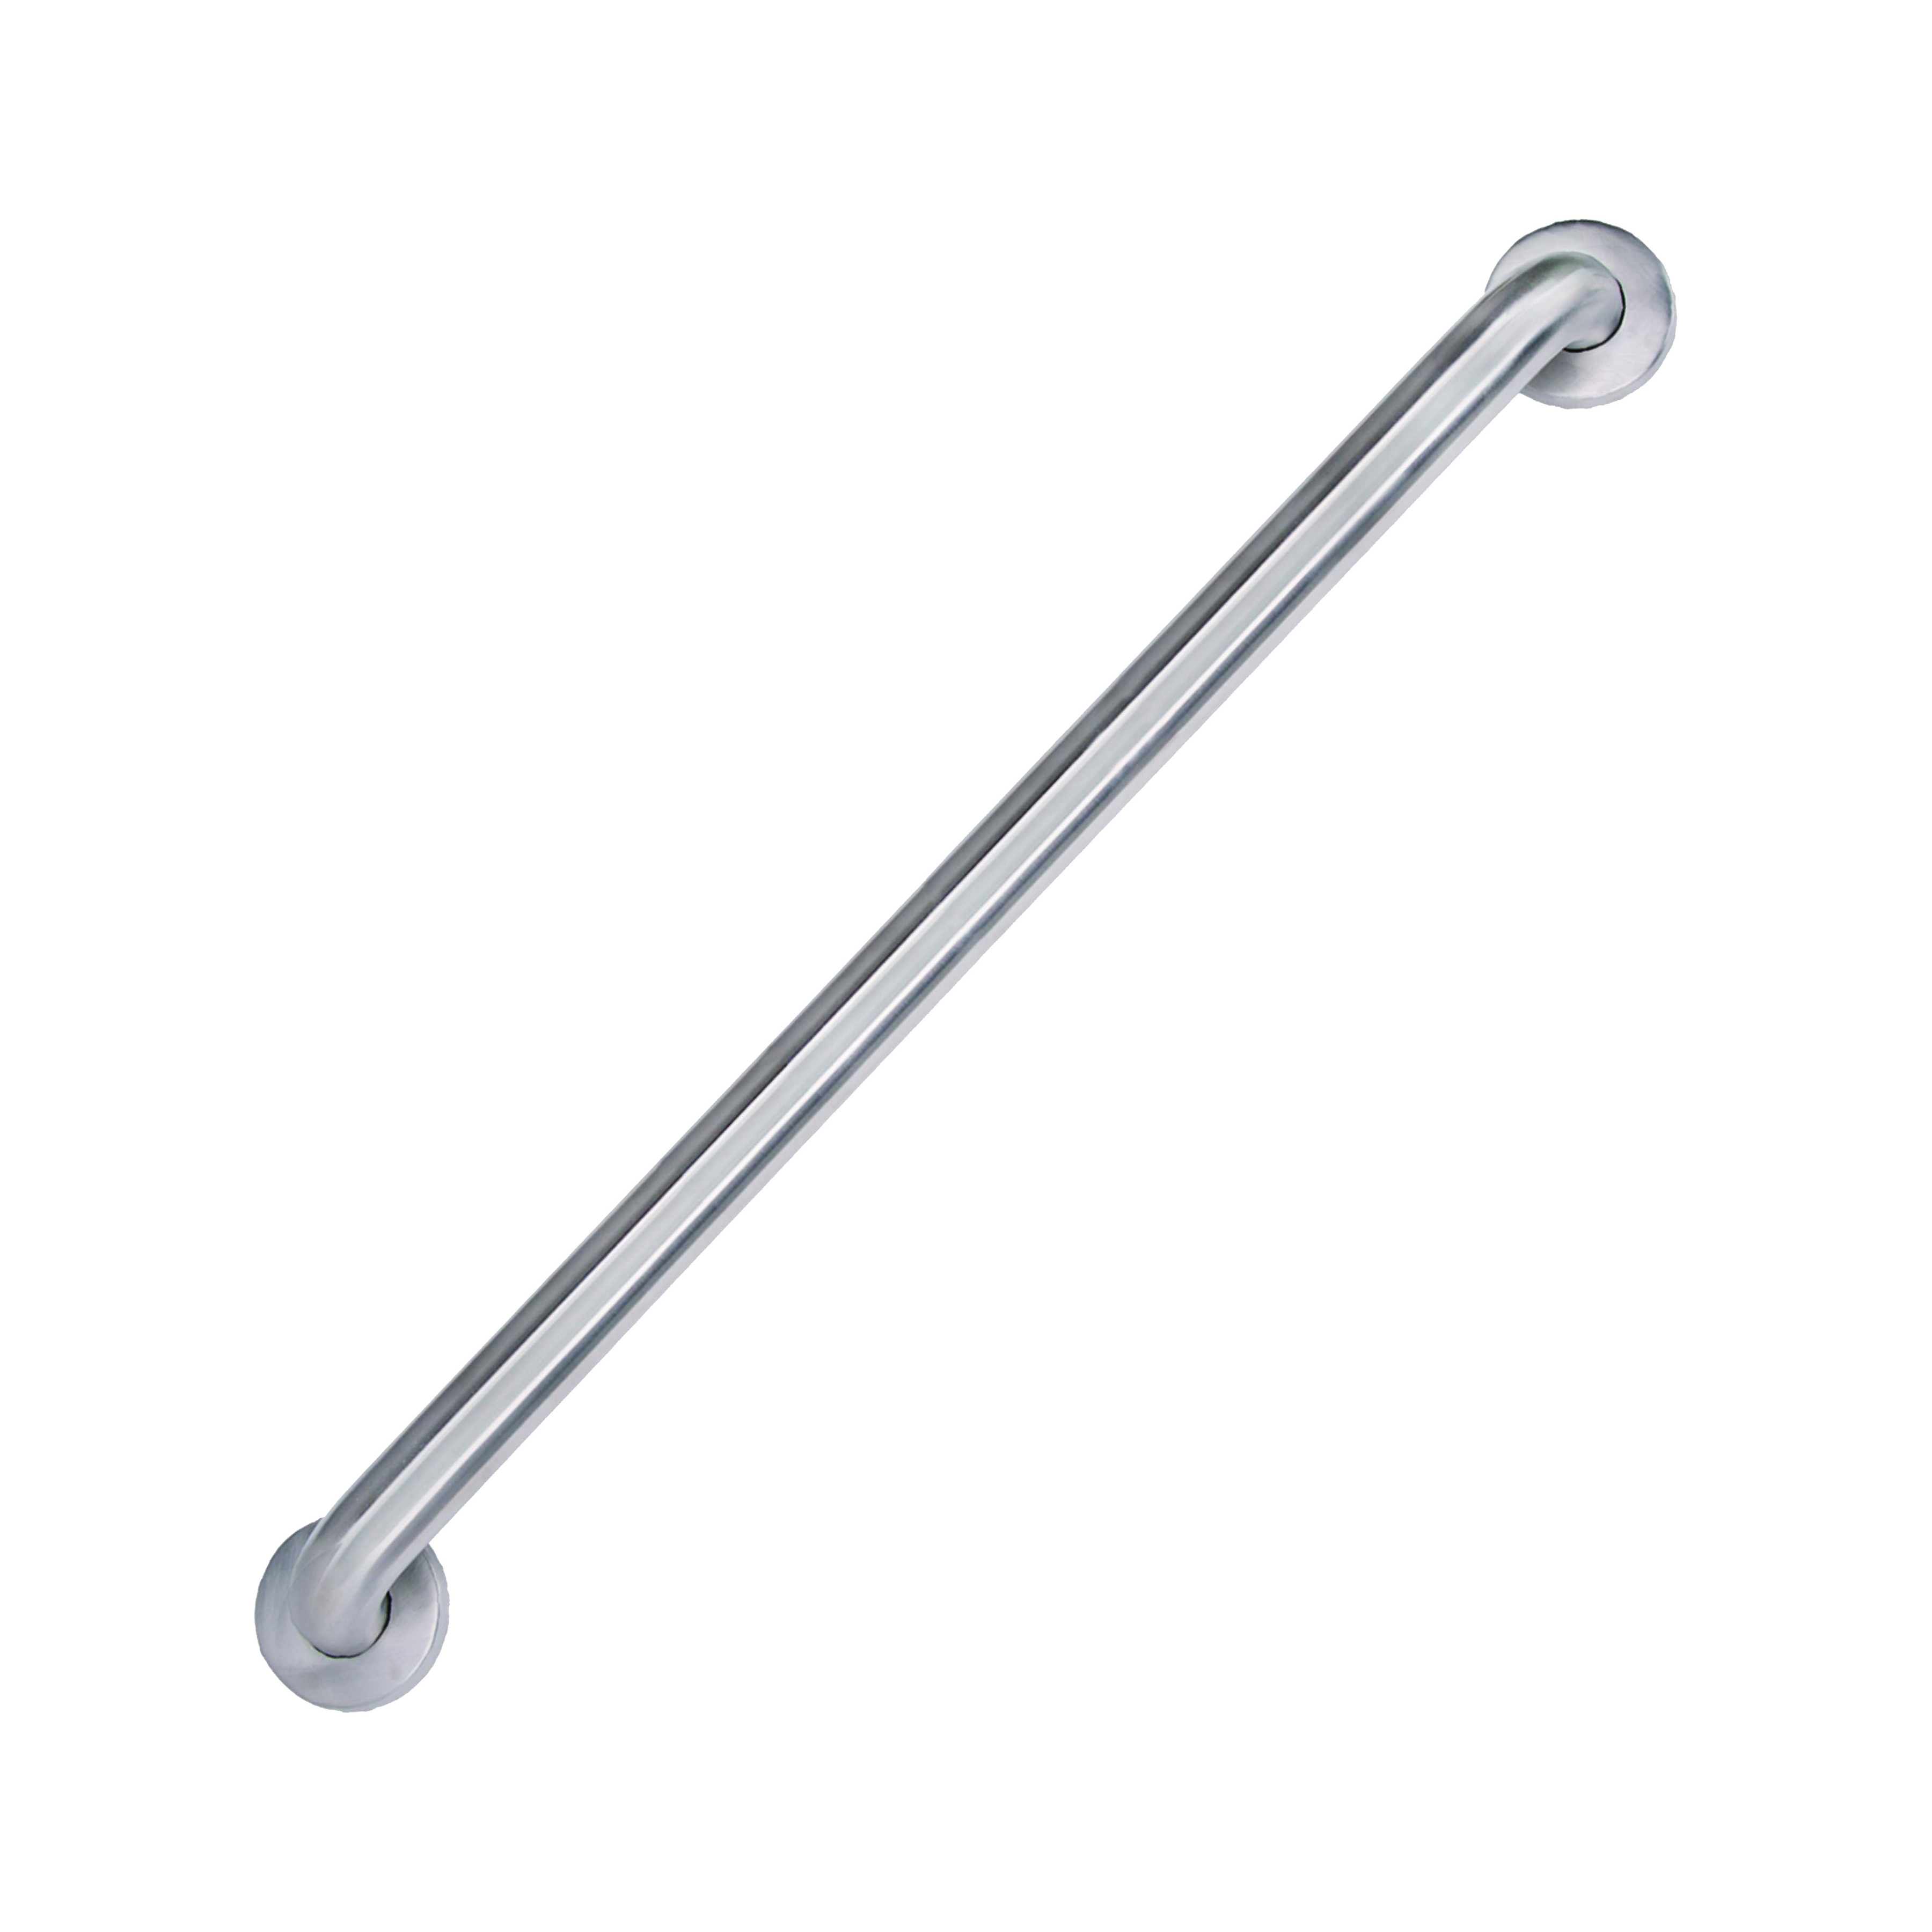 SG01-01&0130 Grab Bar, 30 in L Bar, Stainless Steel, Wall Mounted Mounting